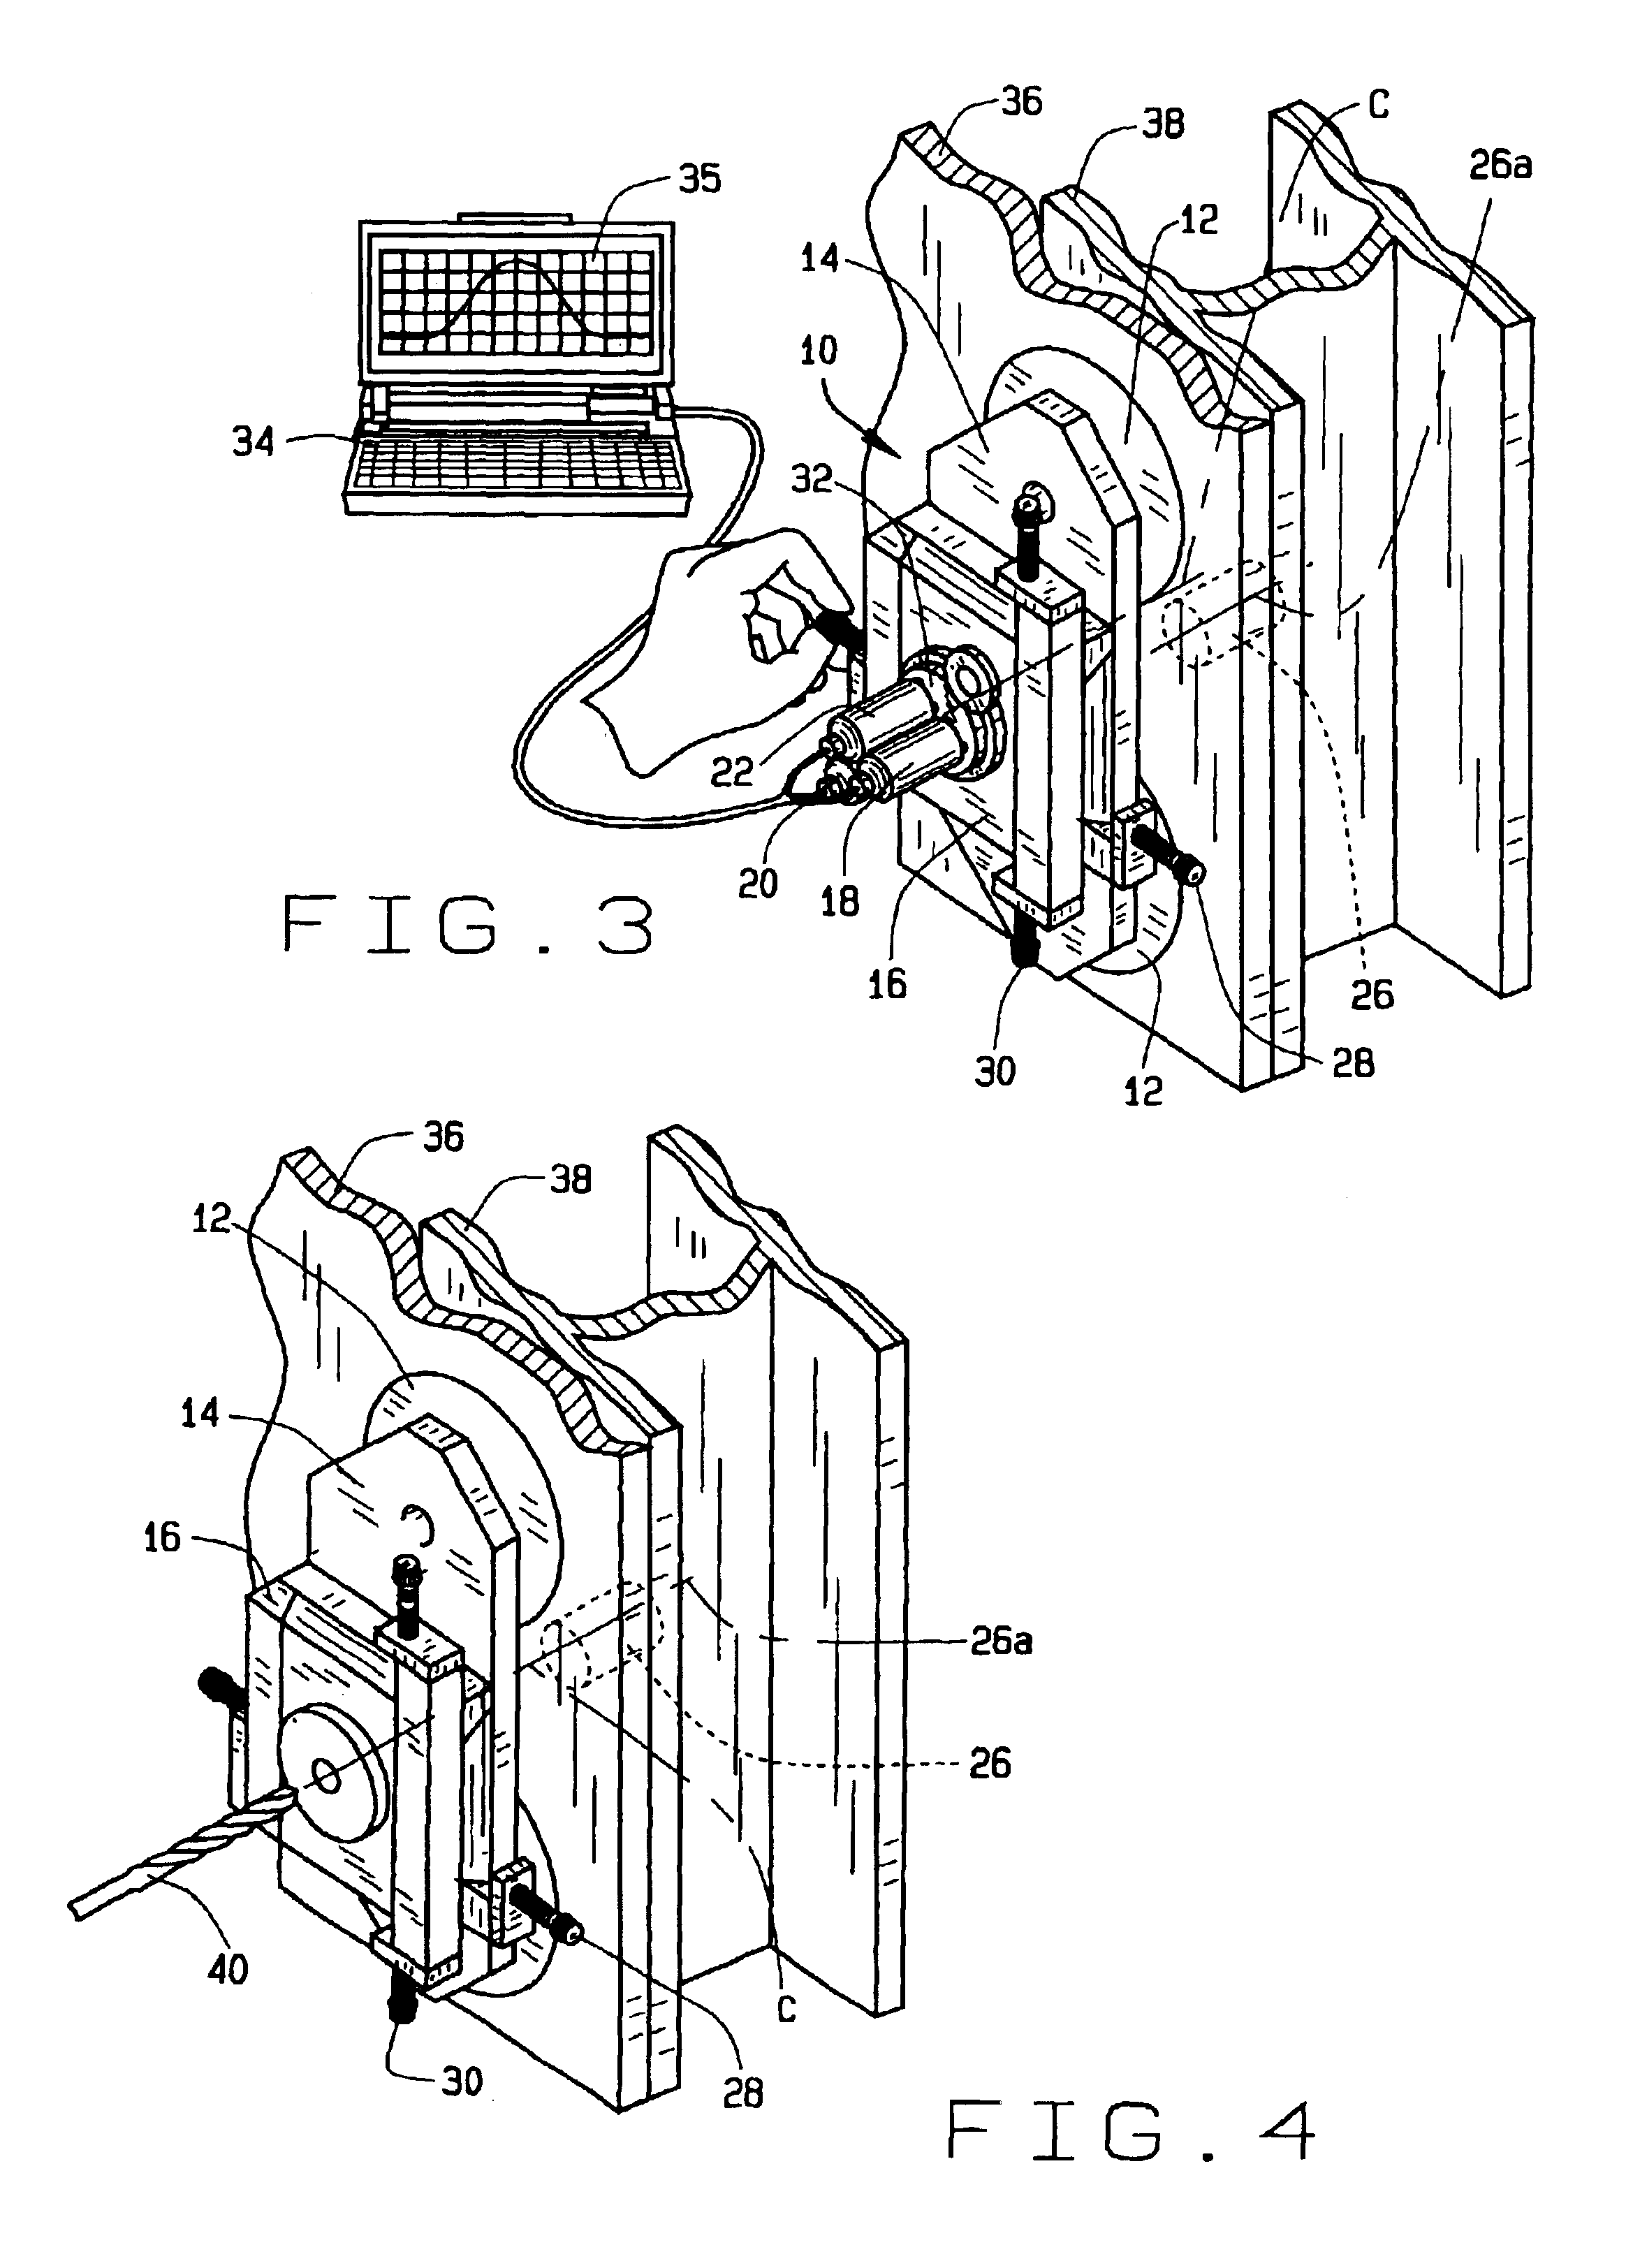 Control system and method for a magnetic indexer for high accuracy hole drilling